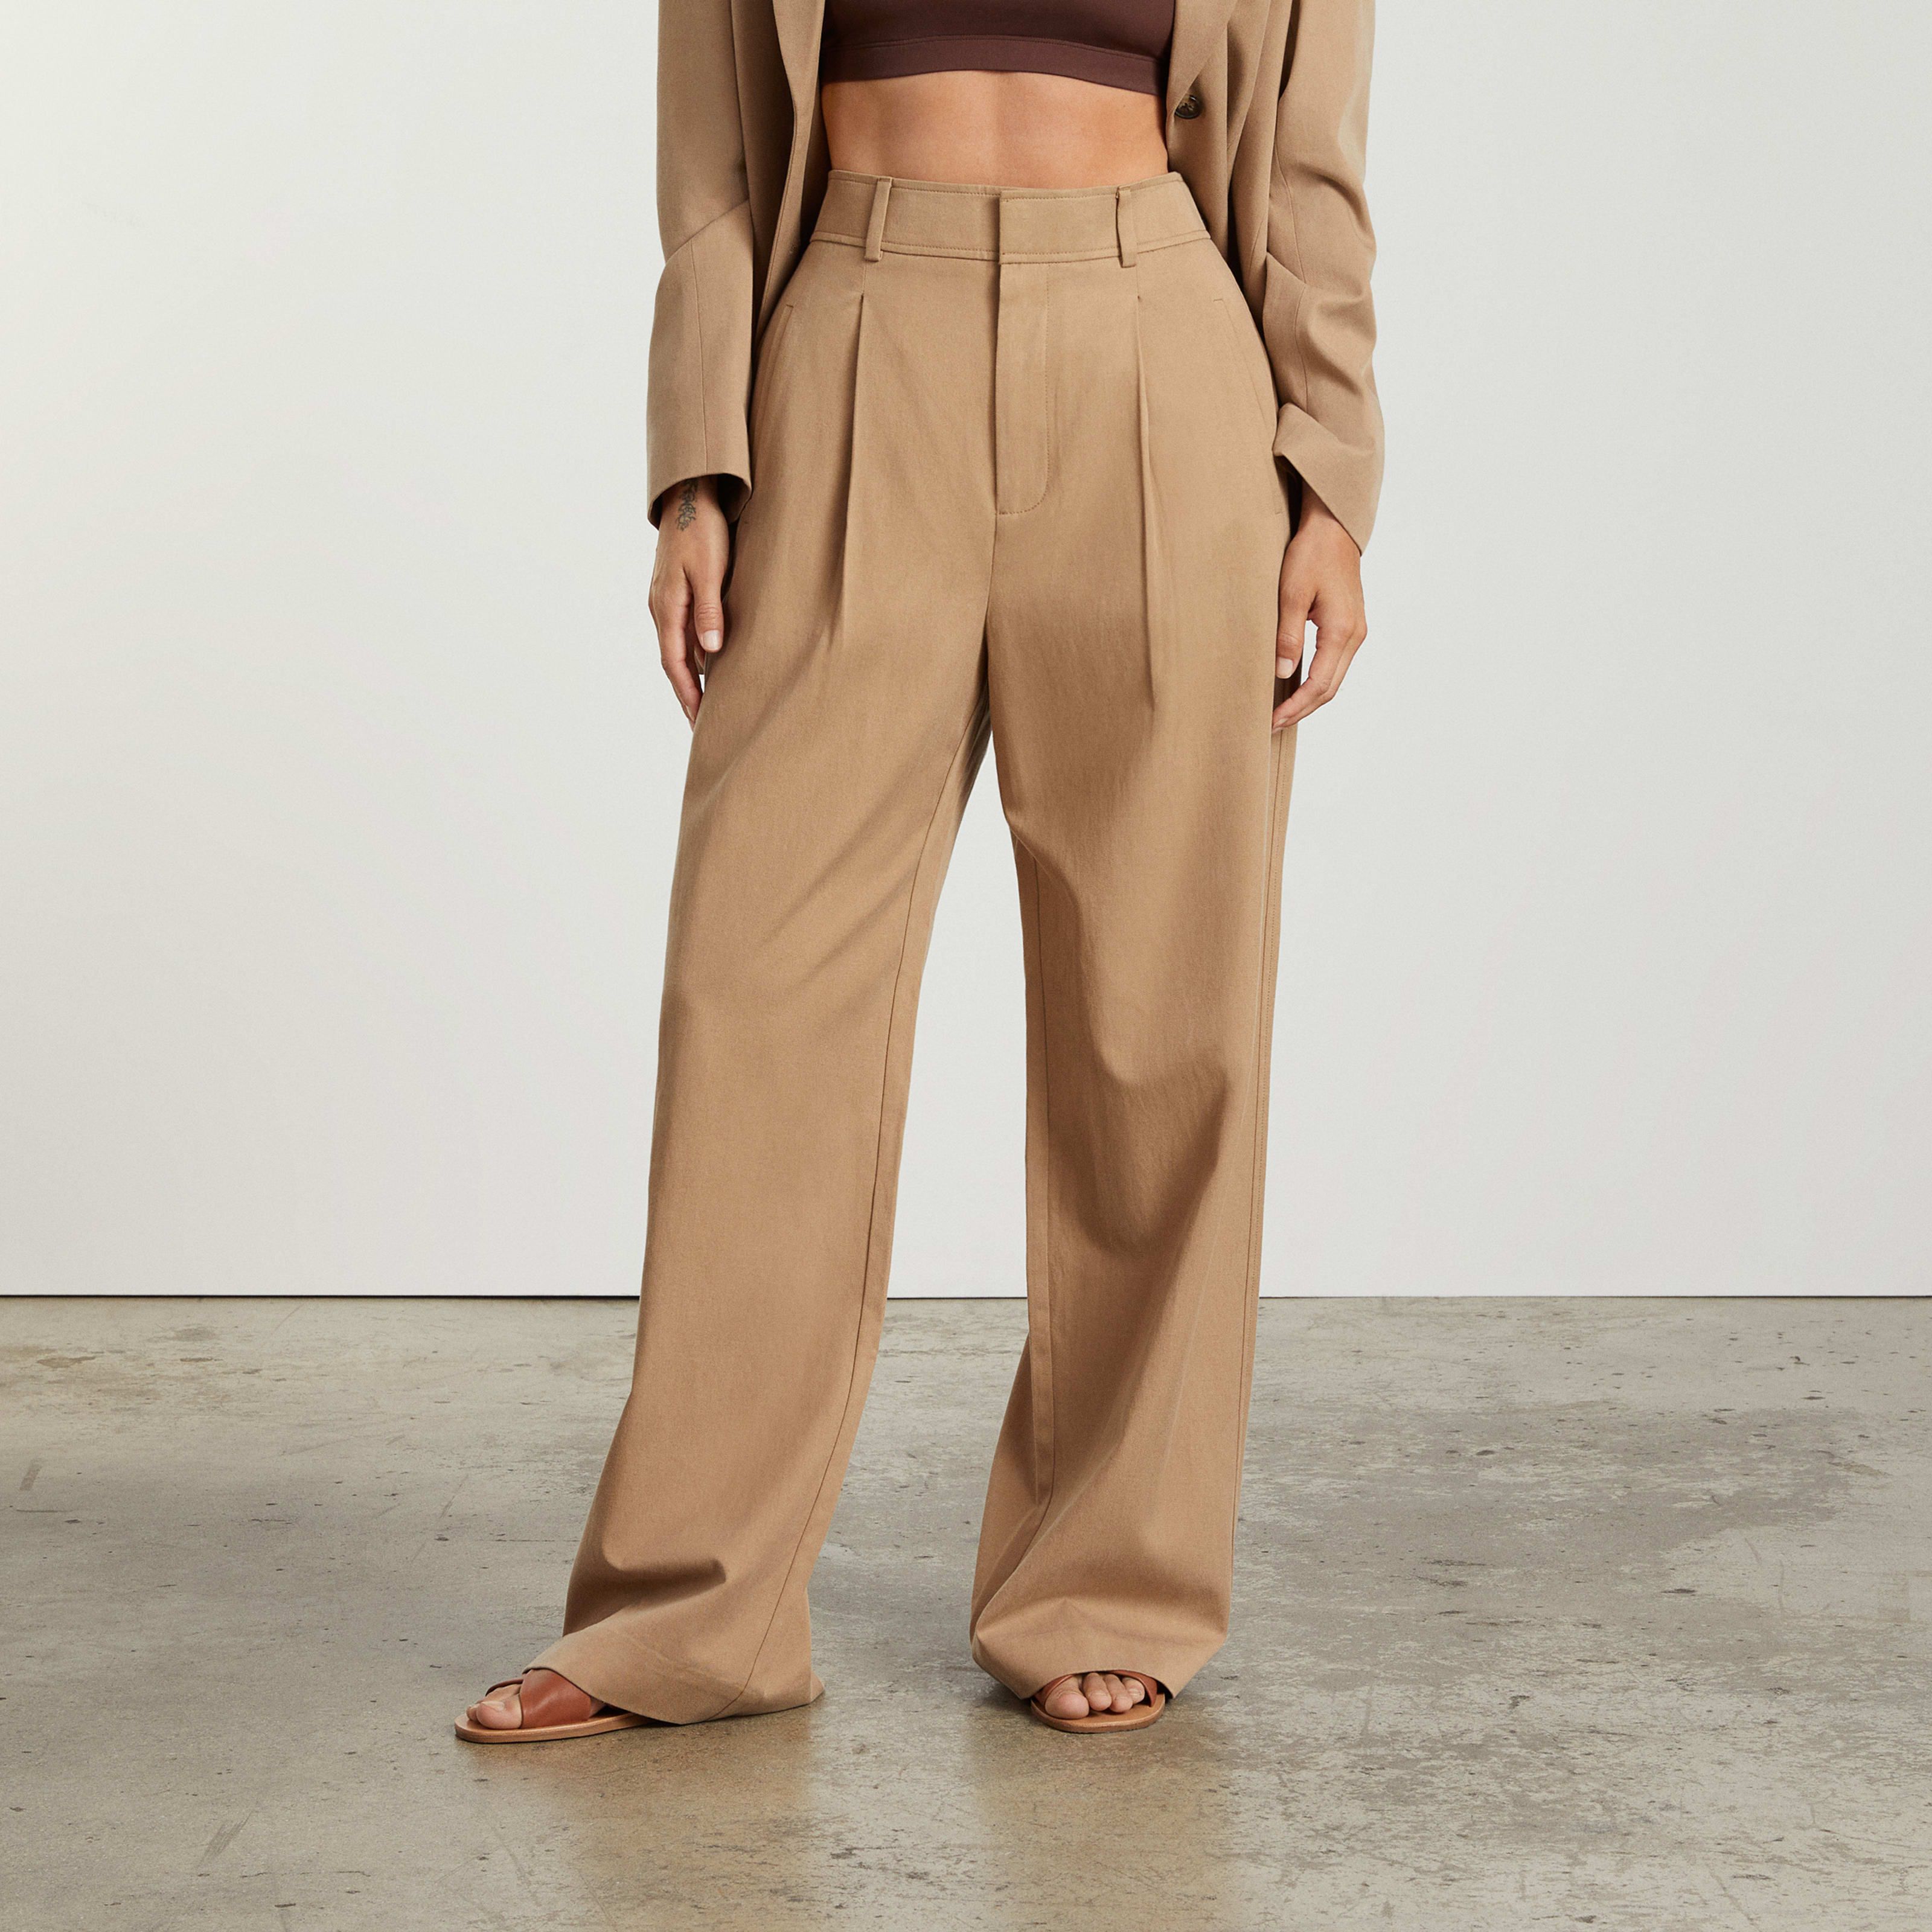 Women's Way-High Drape Pant by Everlane in Ash Brown, Size 8 | Everlane